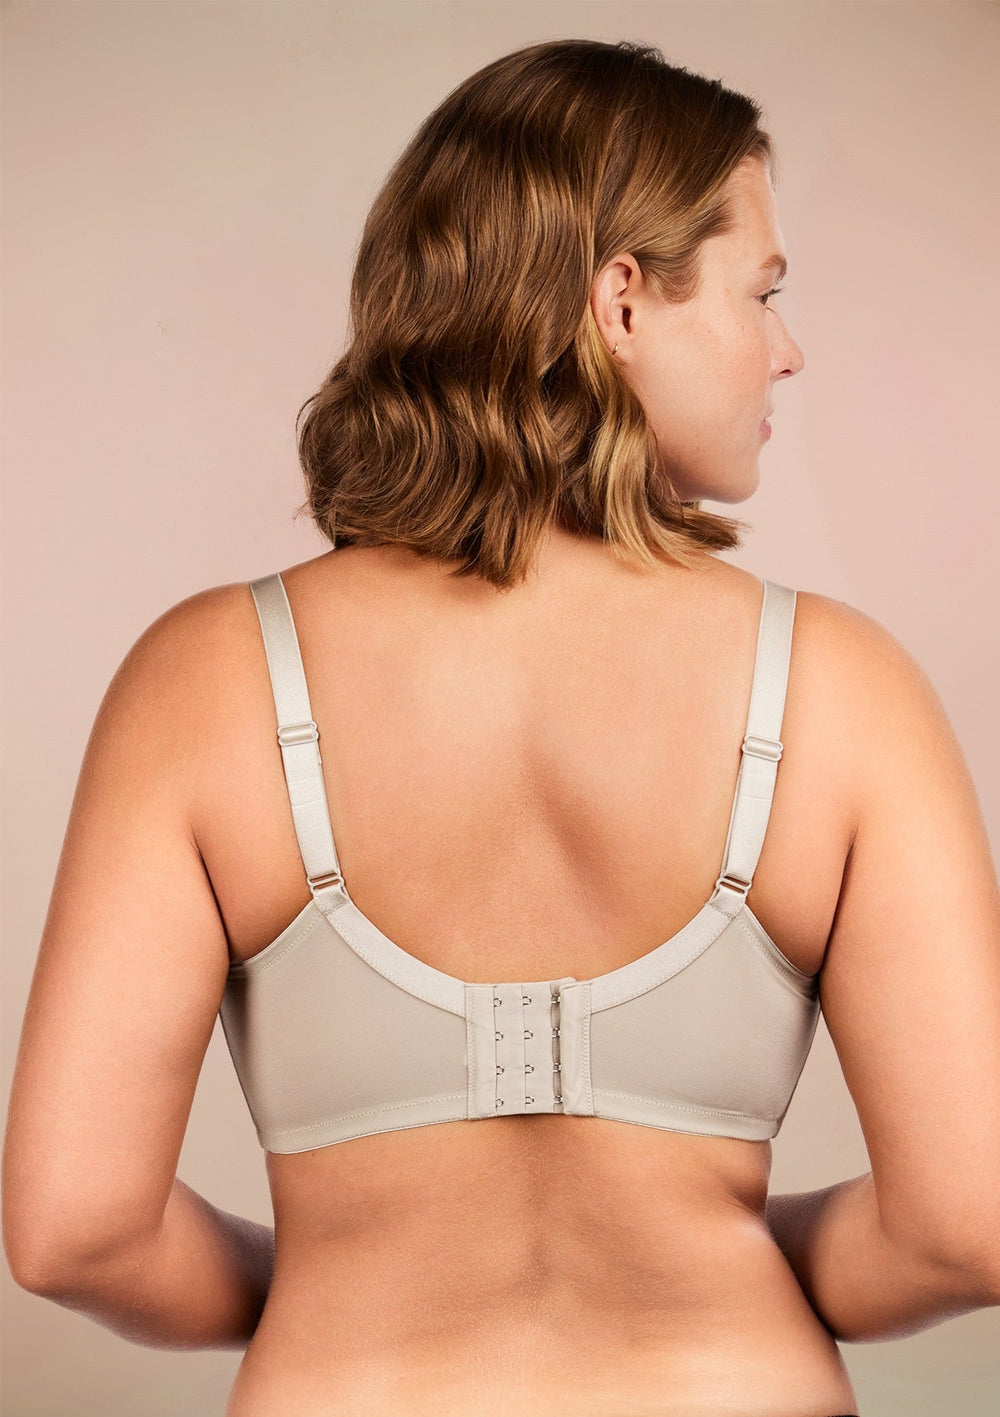 HSIA Seamed Cup Bra: Unlined Lace Bra - Back and Side Smoothing Bra